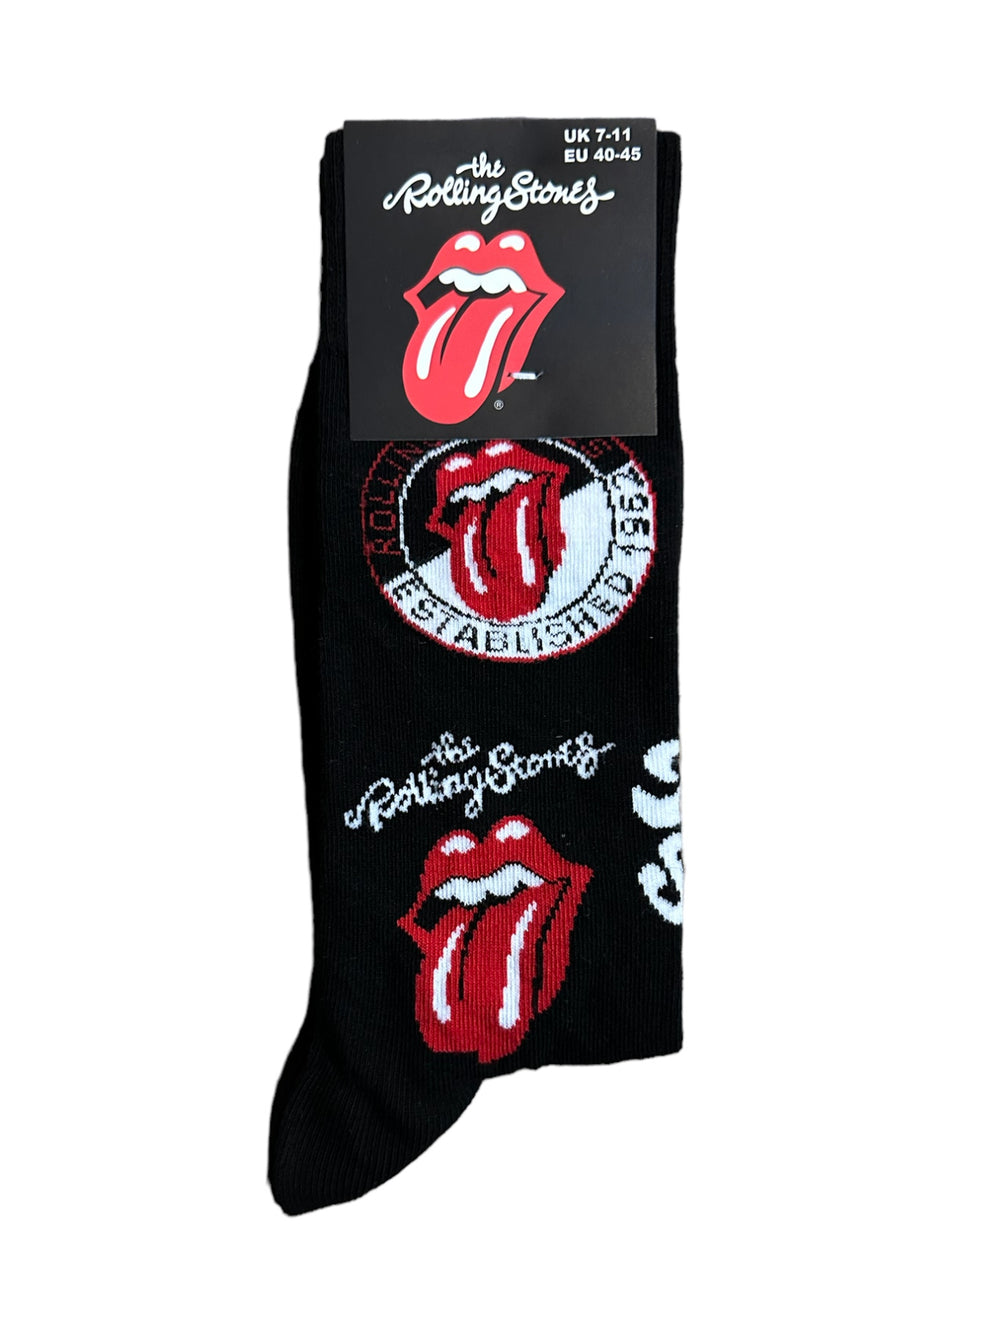 Rolling Stones The - Logos Uni Official Product 1 Pair Jacquard Socks NEW